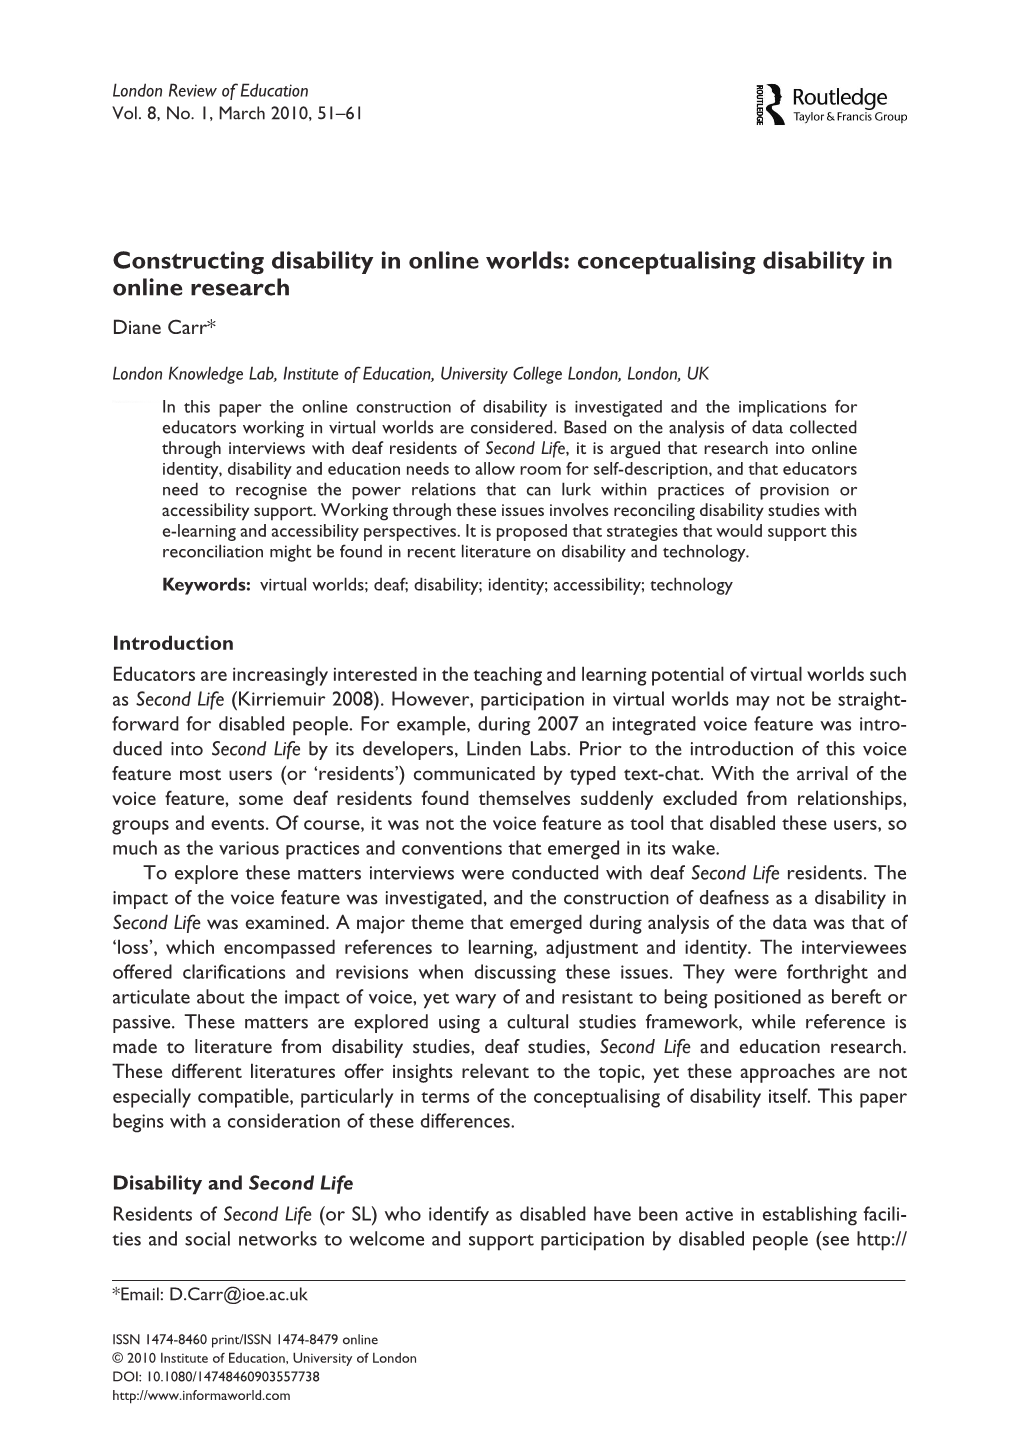 Conceptualising Disability in Online Research Diane Carr*